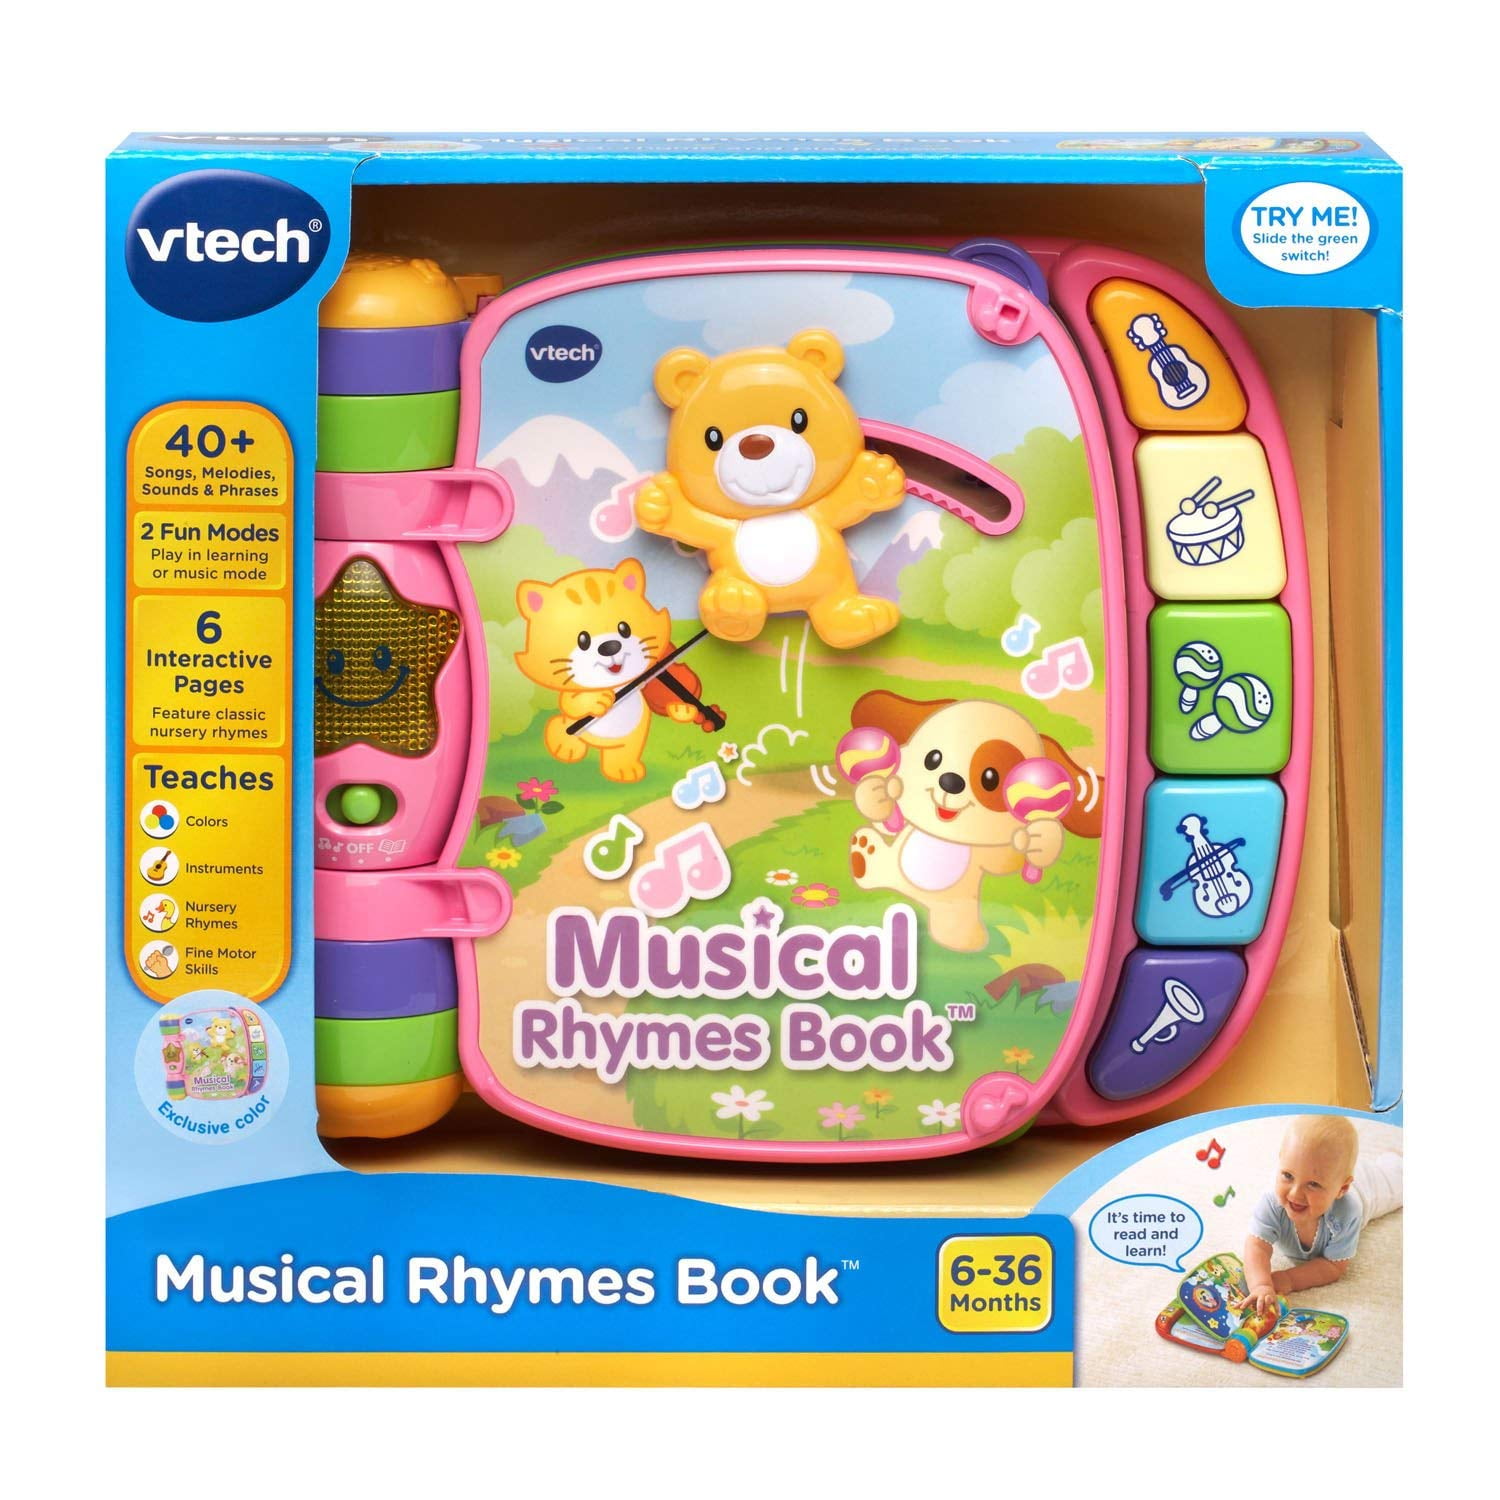 VTech Musical Rhymes Book, 40+ songs, melodies, sounds and phrases, Pink  New! 